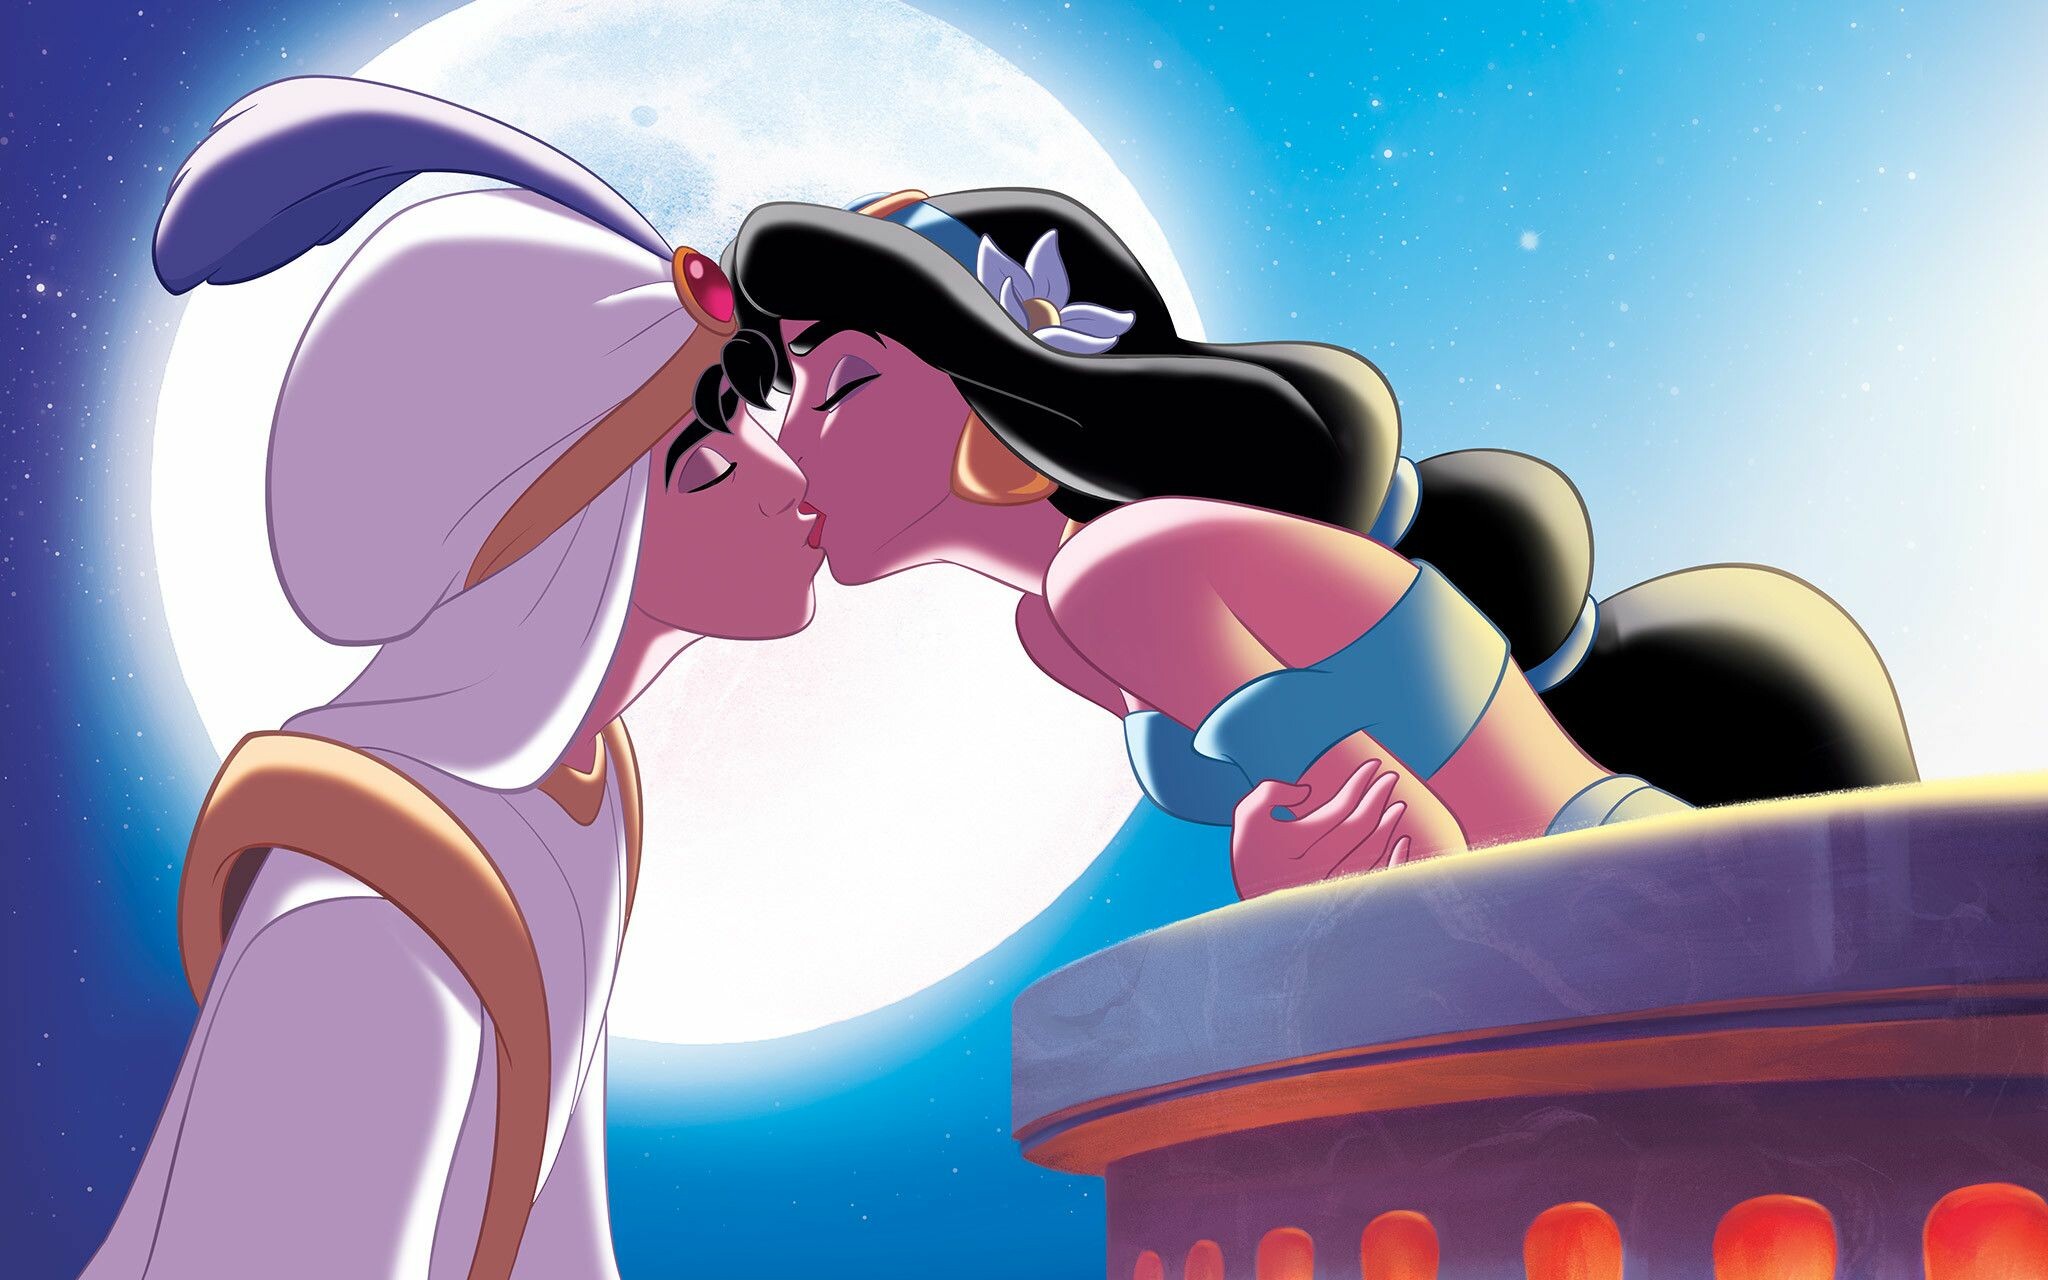 Aladdin (Cartoon): The film is centered on a young "street rat" in the kingdom of Agrabah who uses the power of a shape-shifting genie to win the heart of Princess Jasmine. 2050x1280 HD Background.